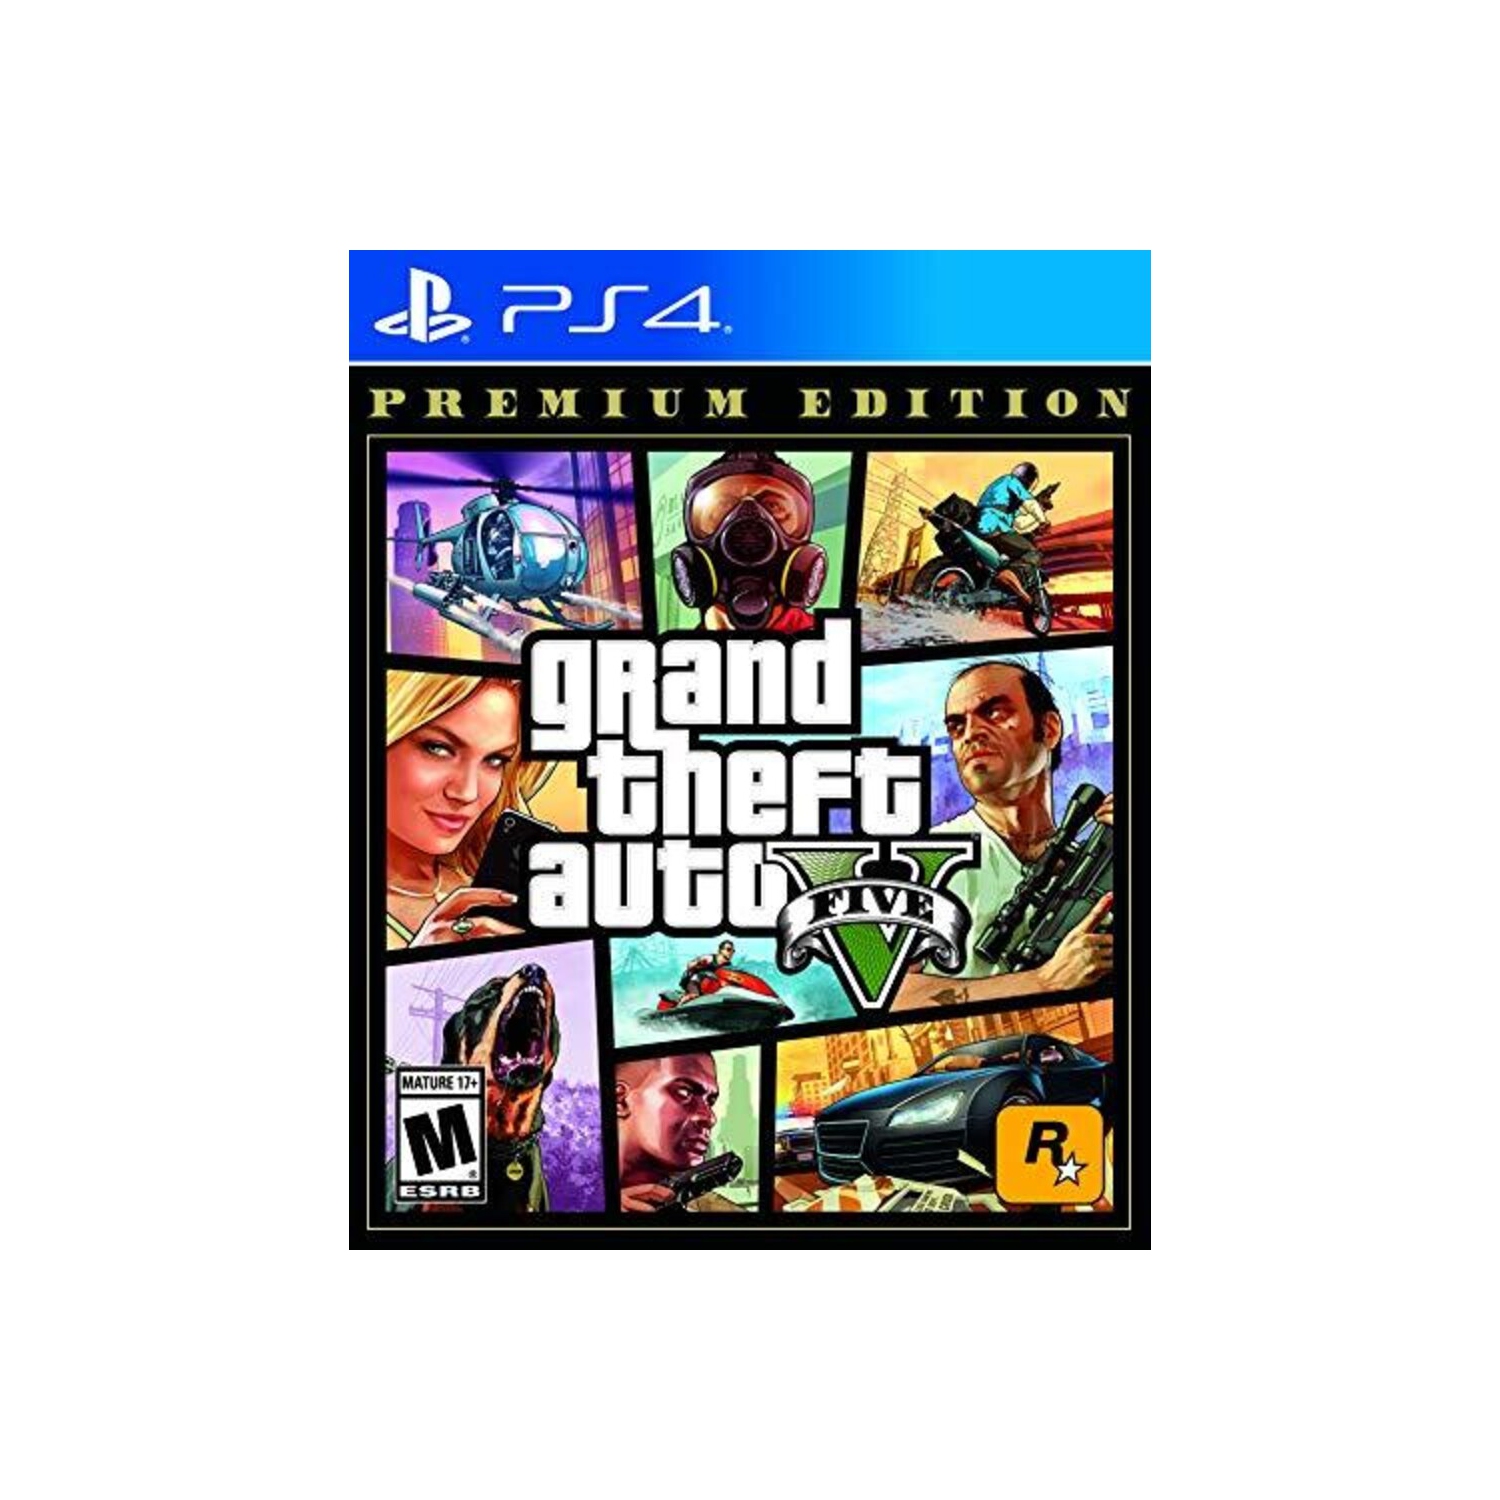 Grand Theft Auto V Premium Online Edition for PlayStation 4 StandardEdition [VIDEOGAMES] PS 4